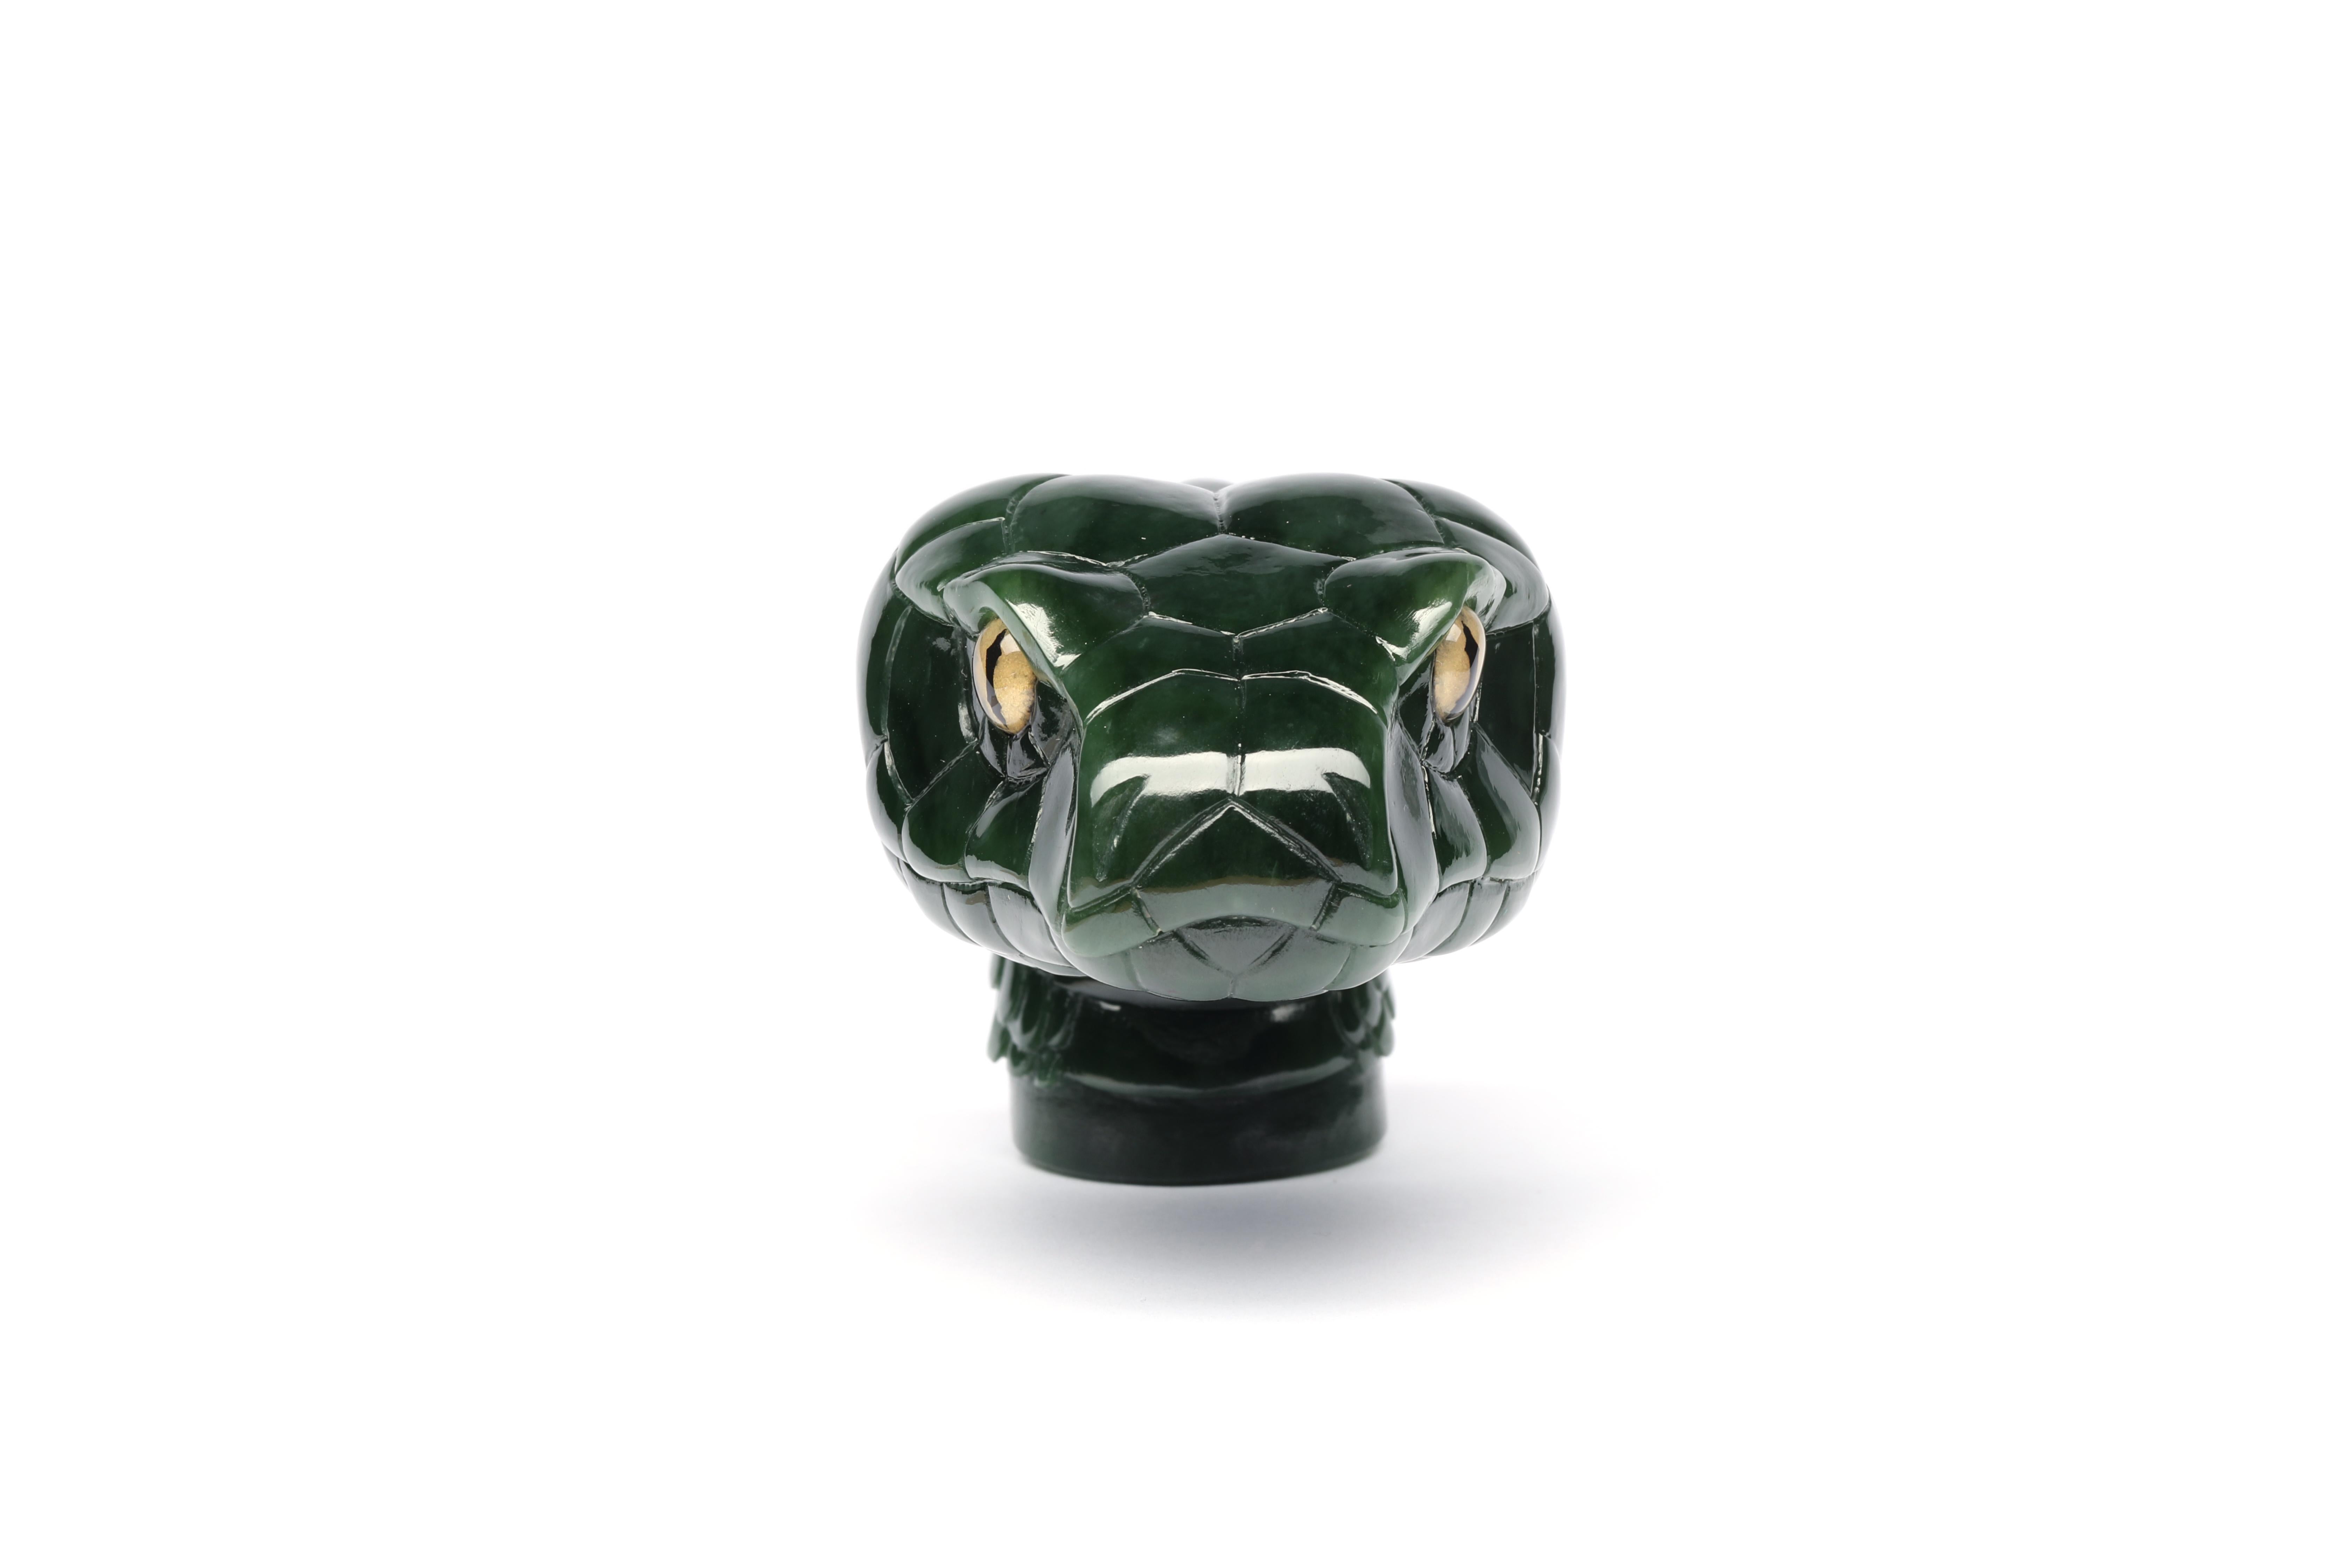 This extraordinary jade snake carving can be custom designed into the object of your dreams.  The first execution was made to be the handle of a walking stick, but the possibilities are endless.  

The nephrite jade from British Colombia is a deep